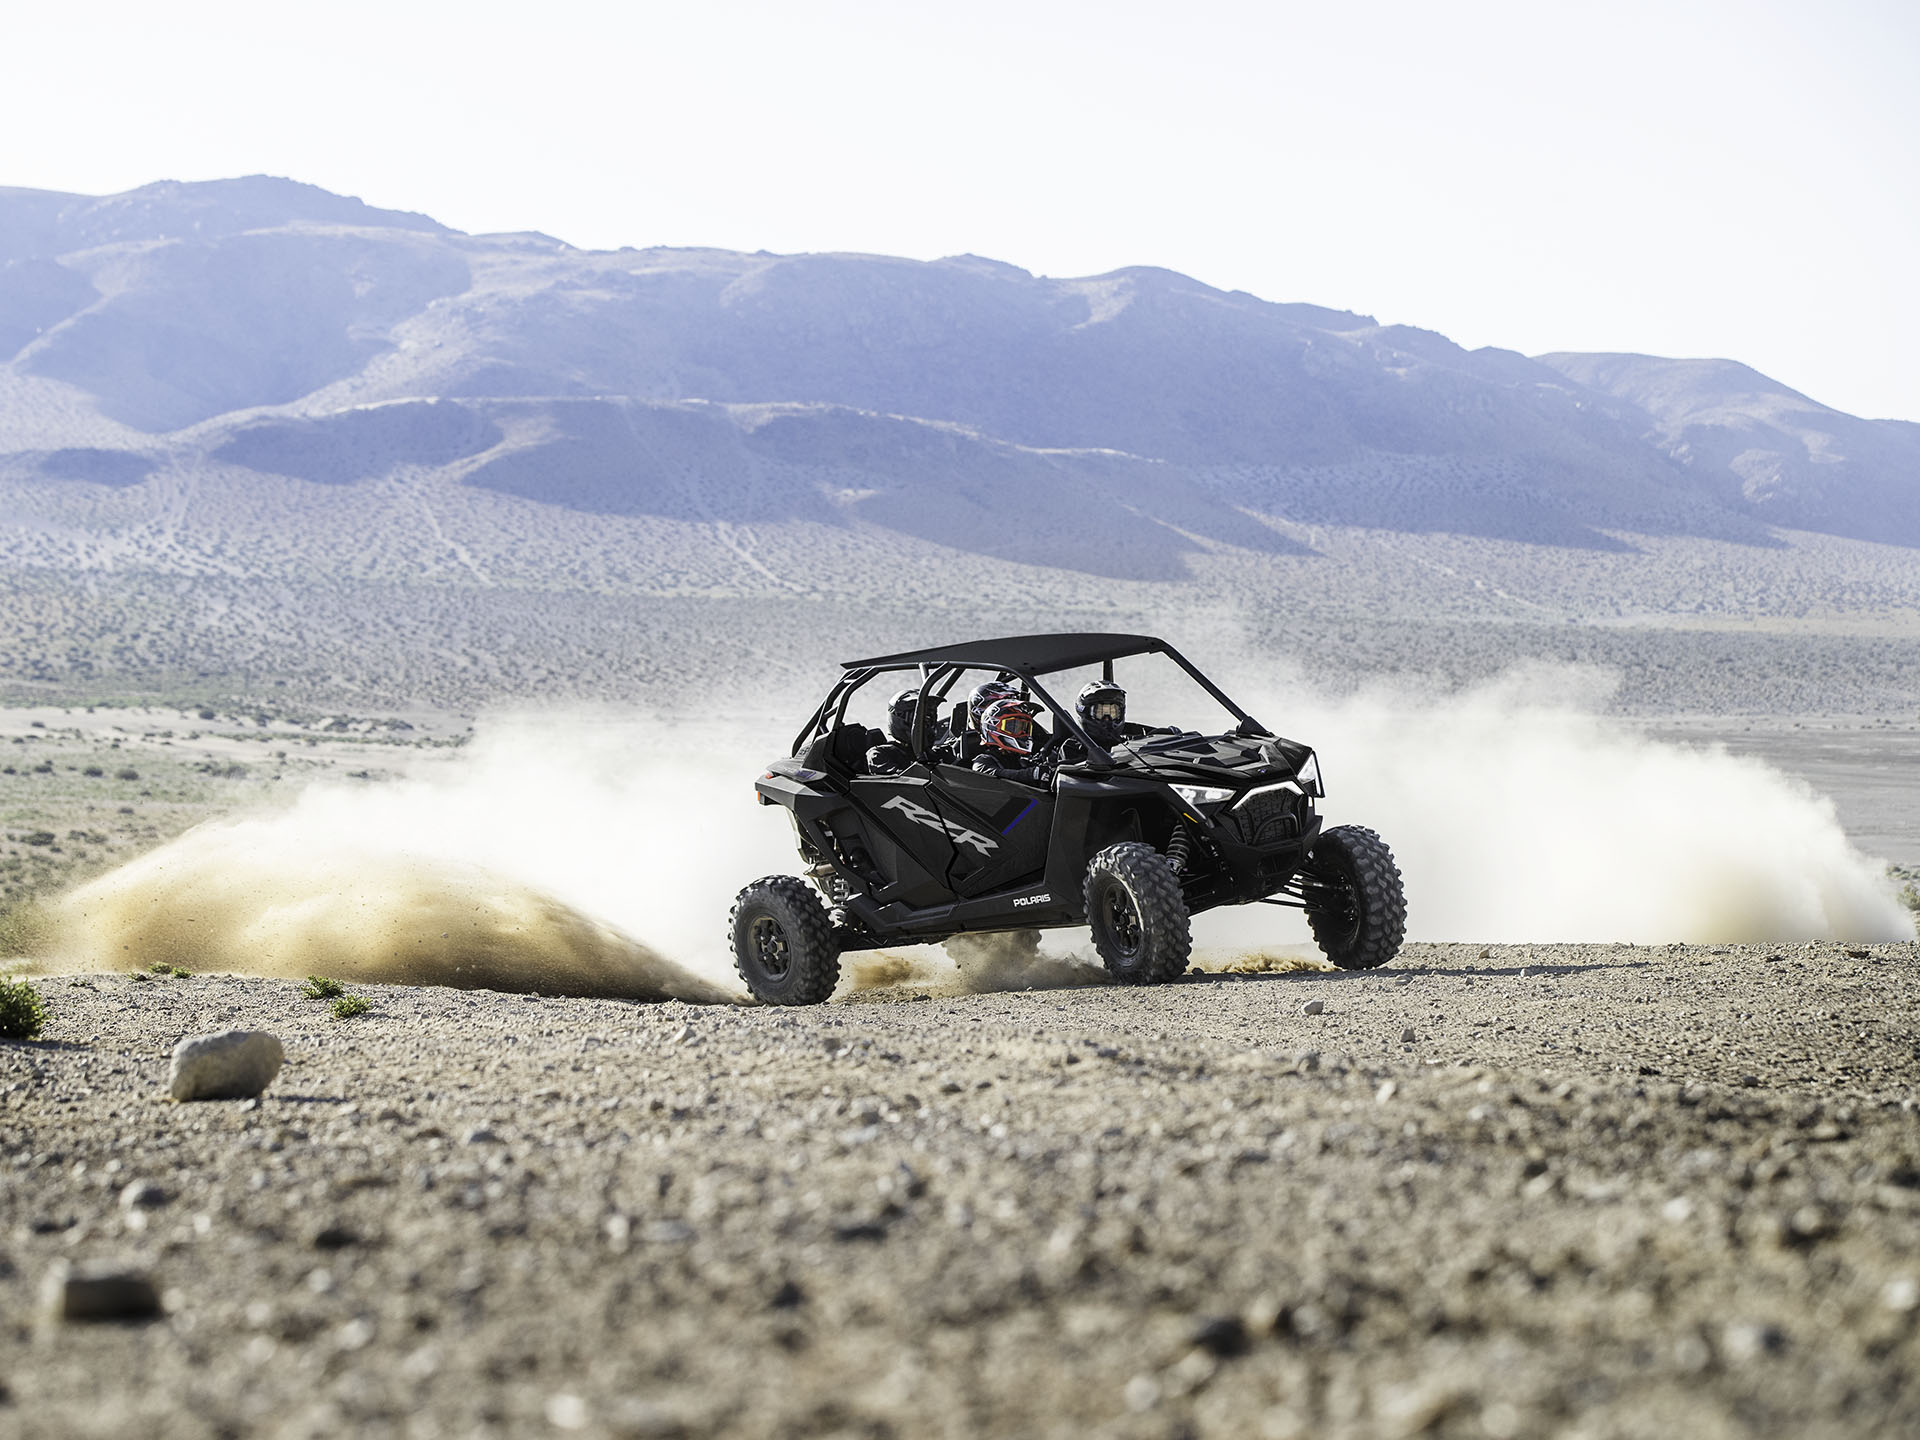 2023 Polaris RZR Pro XP 4 Ultimate in Clearwater, Florida - Photo 9